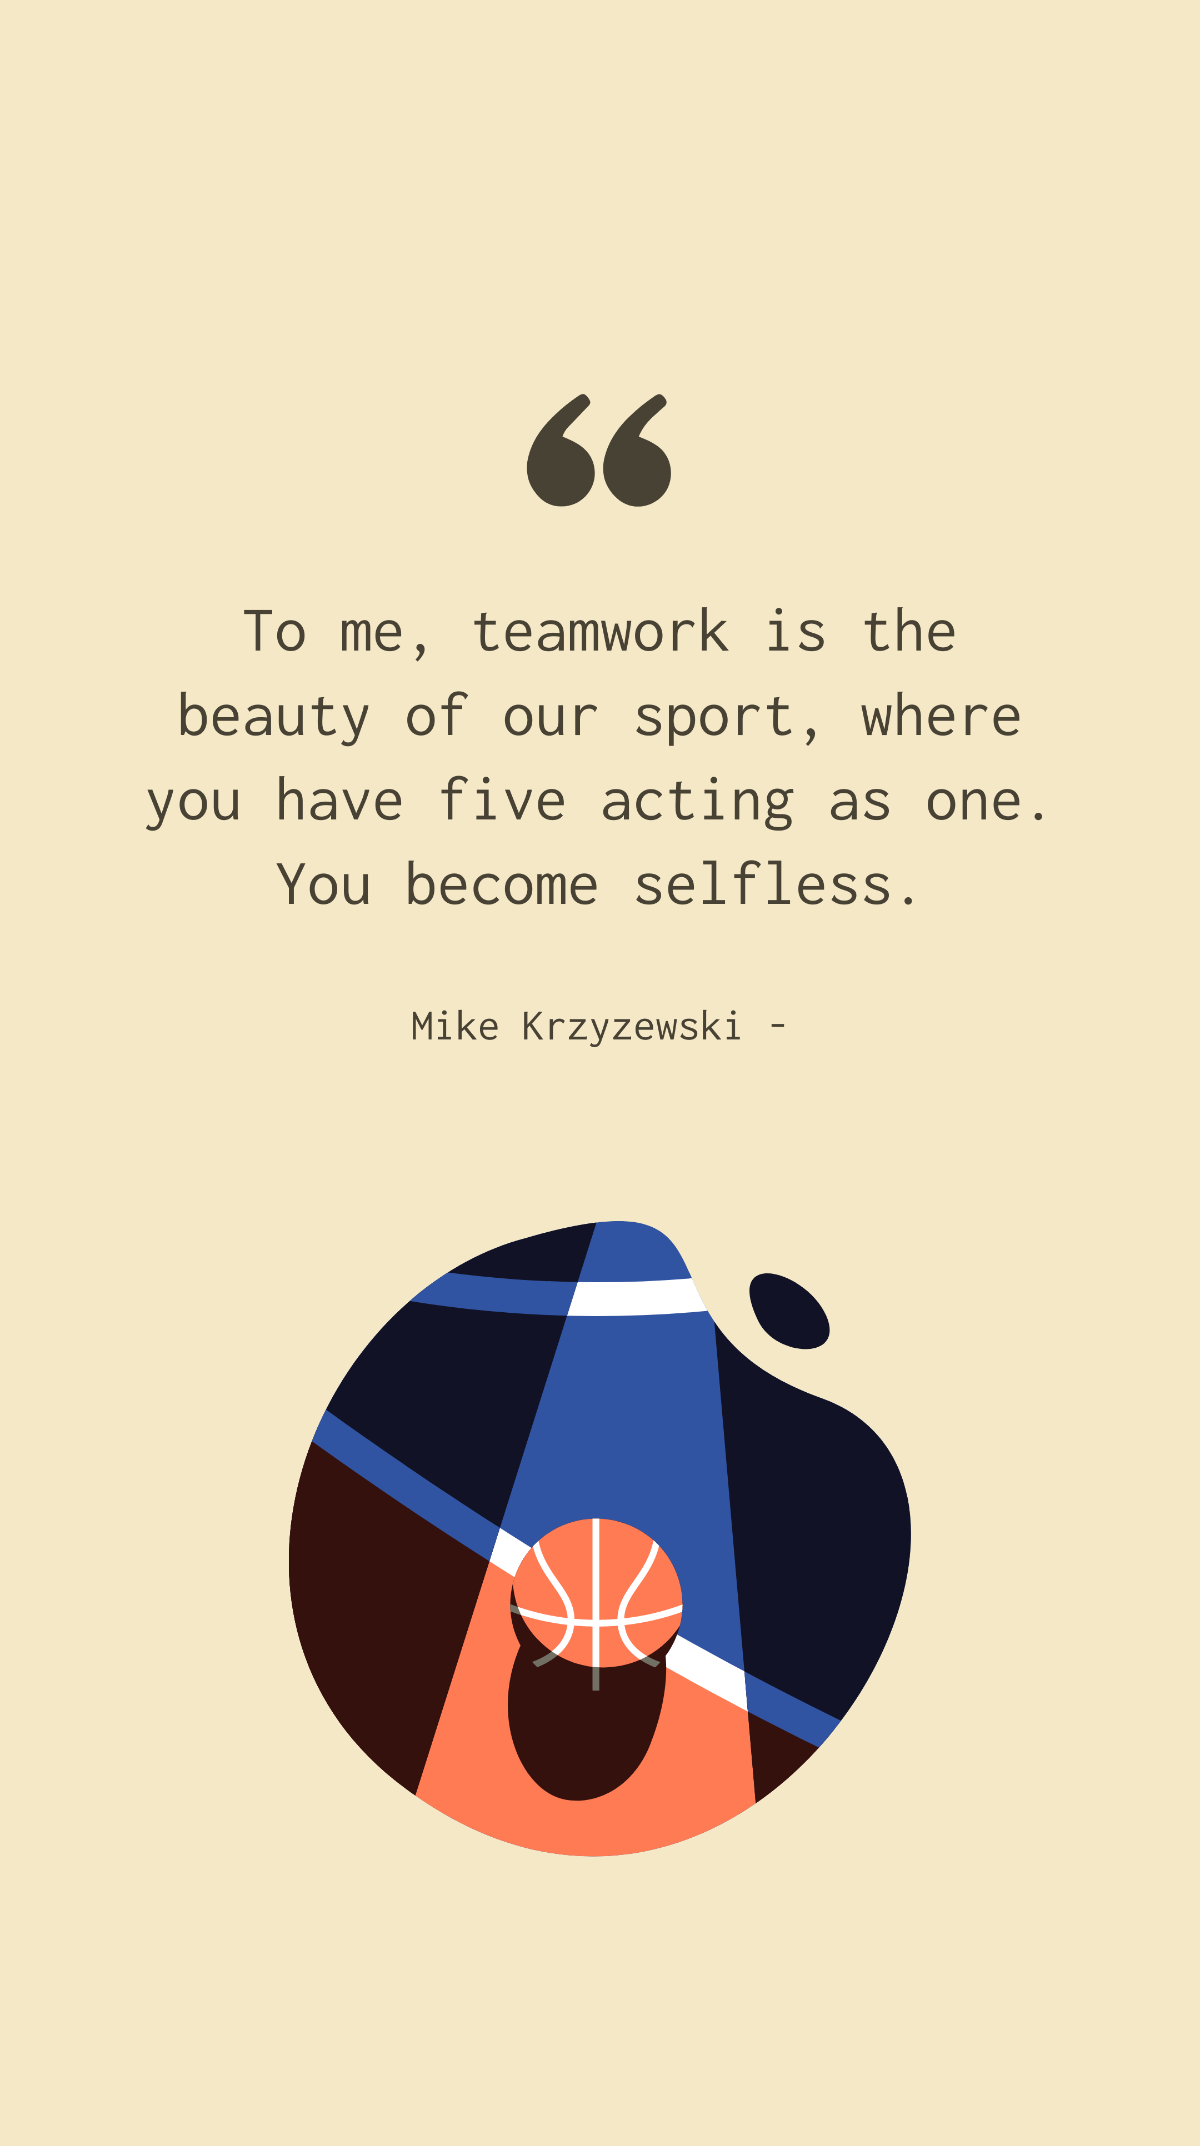 Free Mike Krzyzewski - To me, teamwork is the beauty of our sport, where you have five acting as one. You become selfless. Template